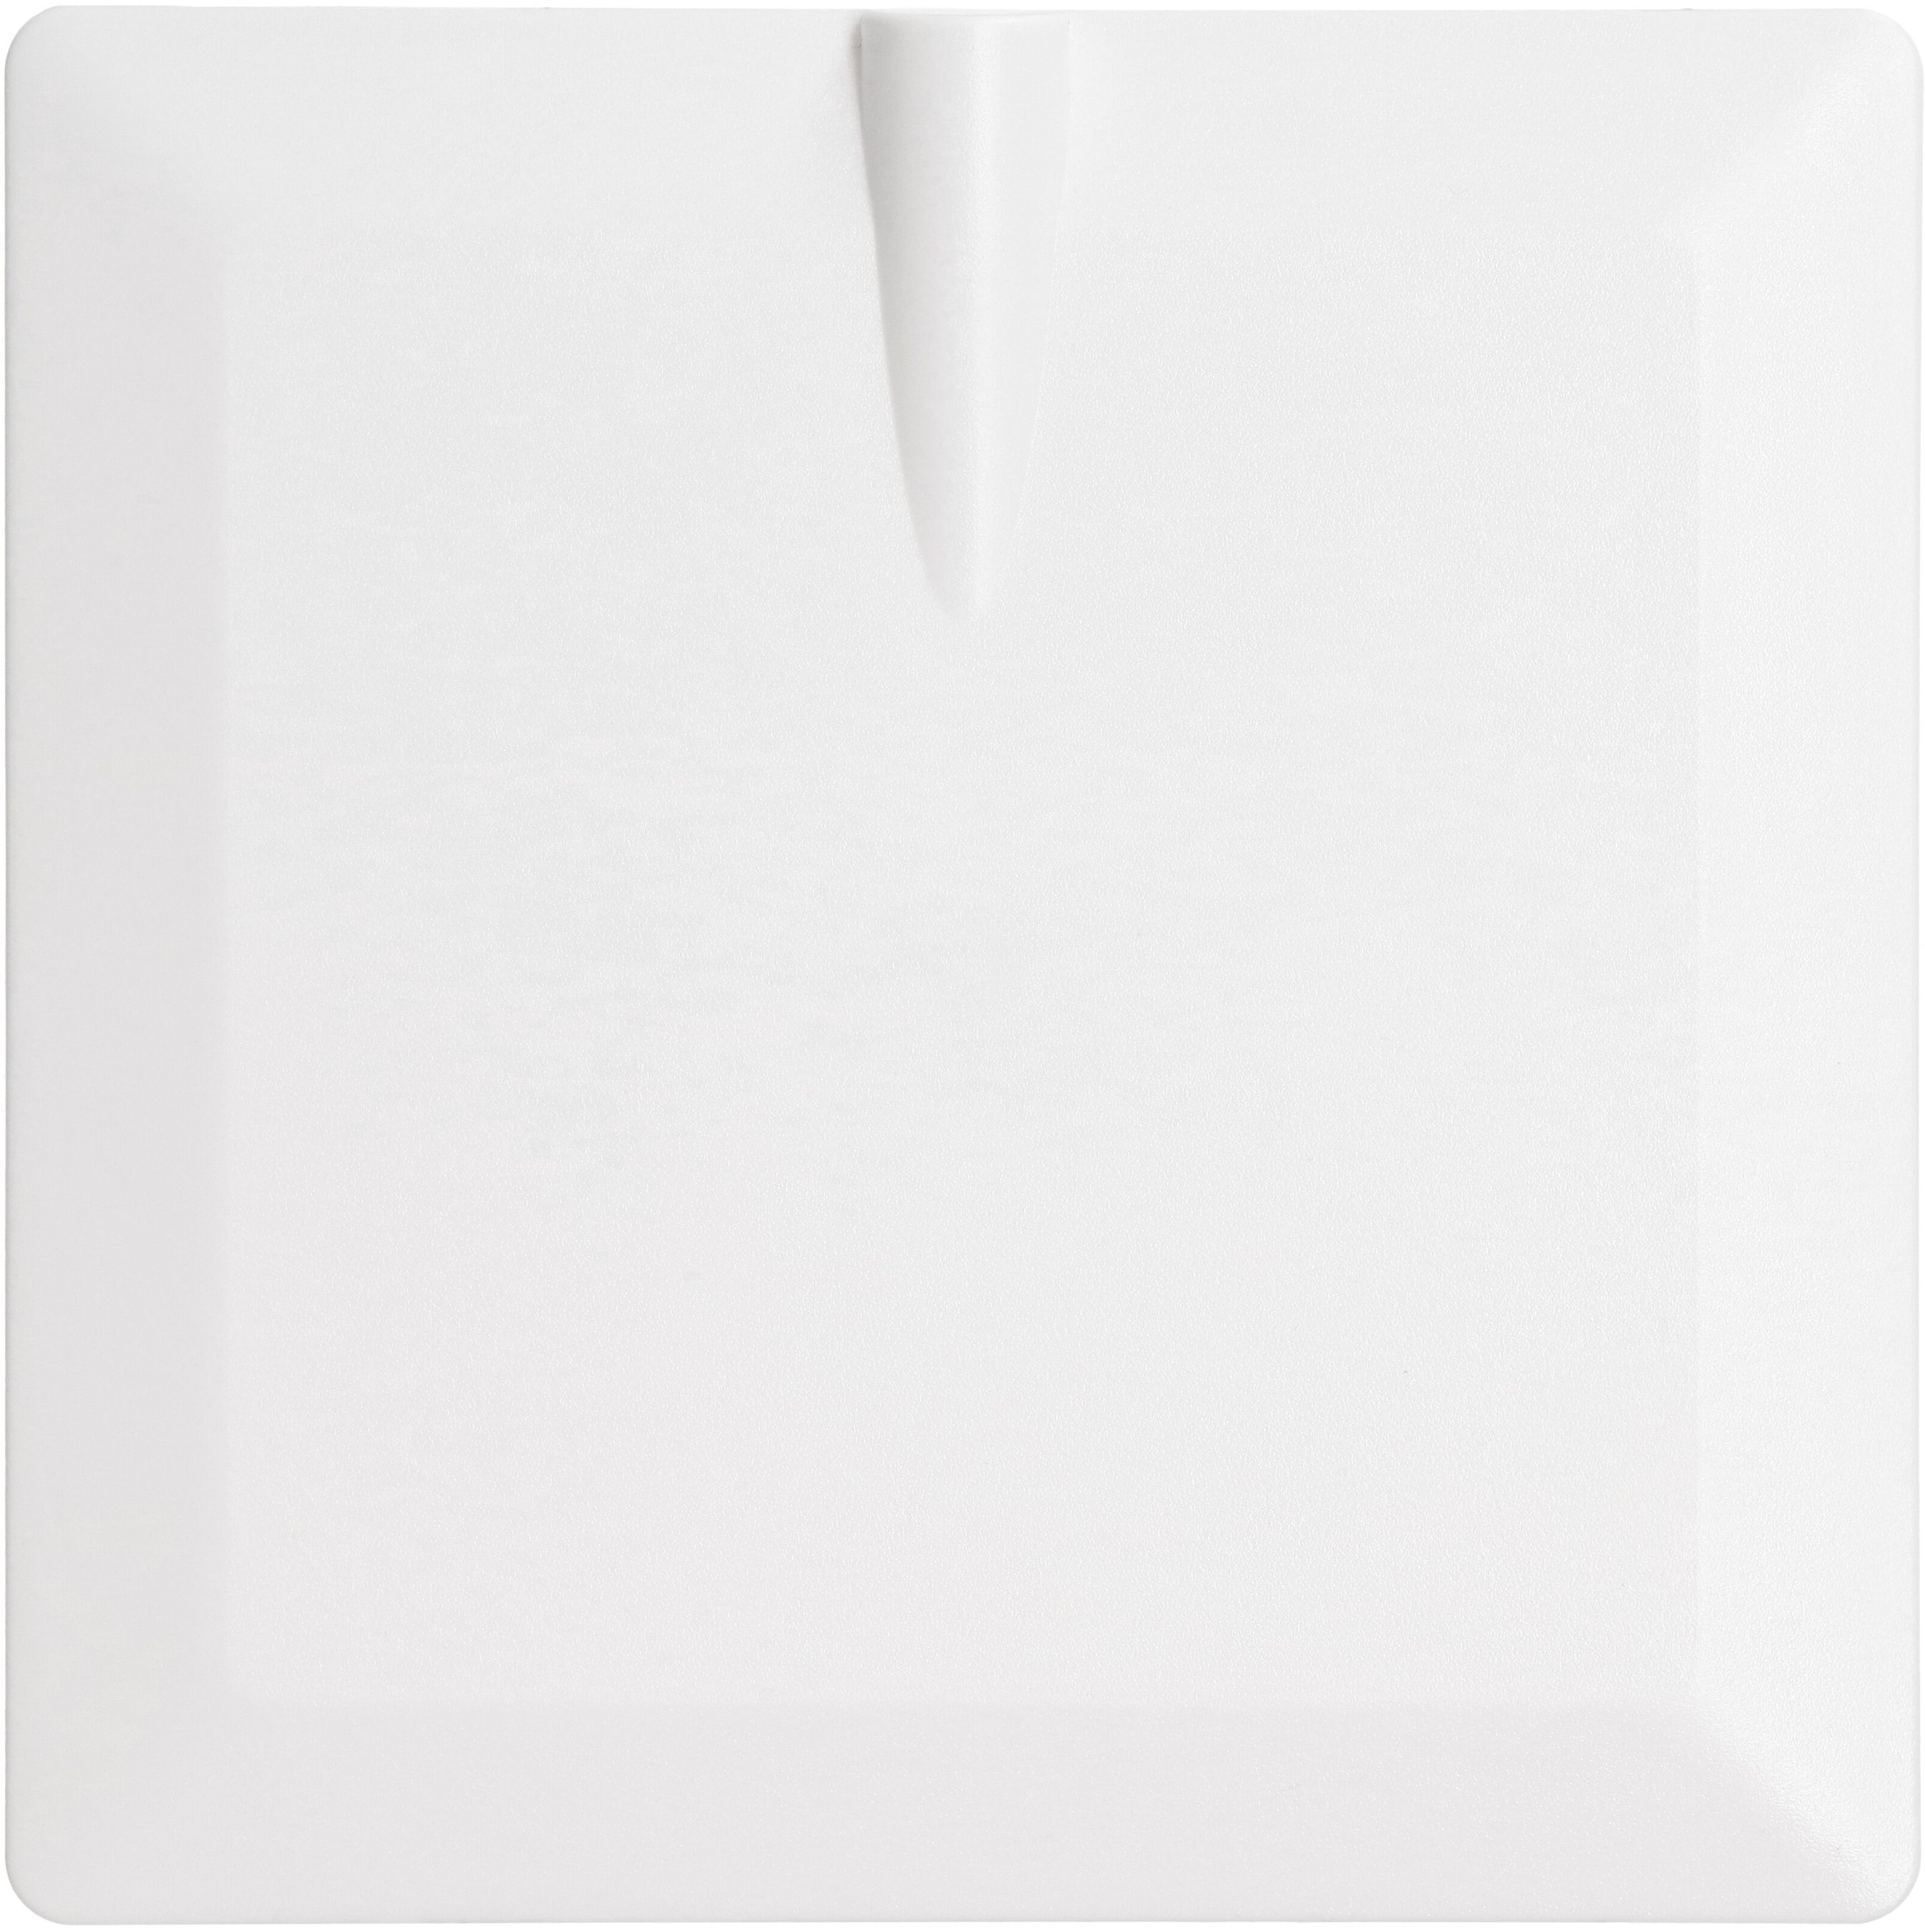 Push-in cover with cable outlet white